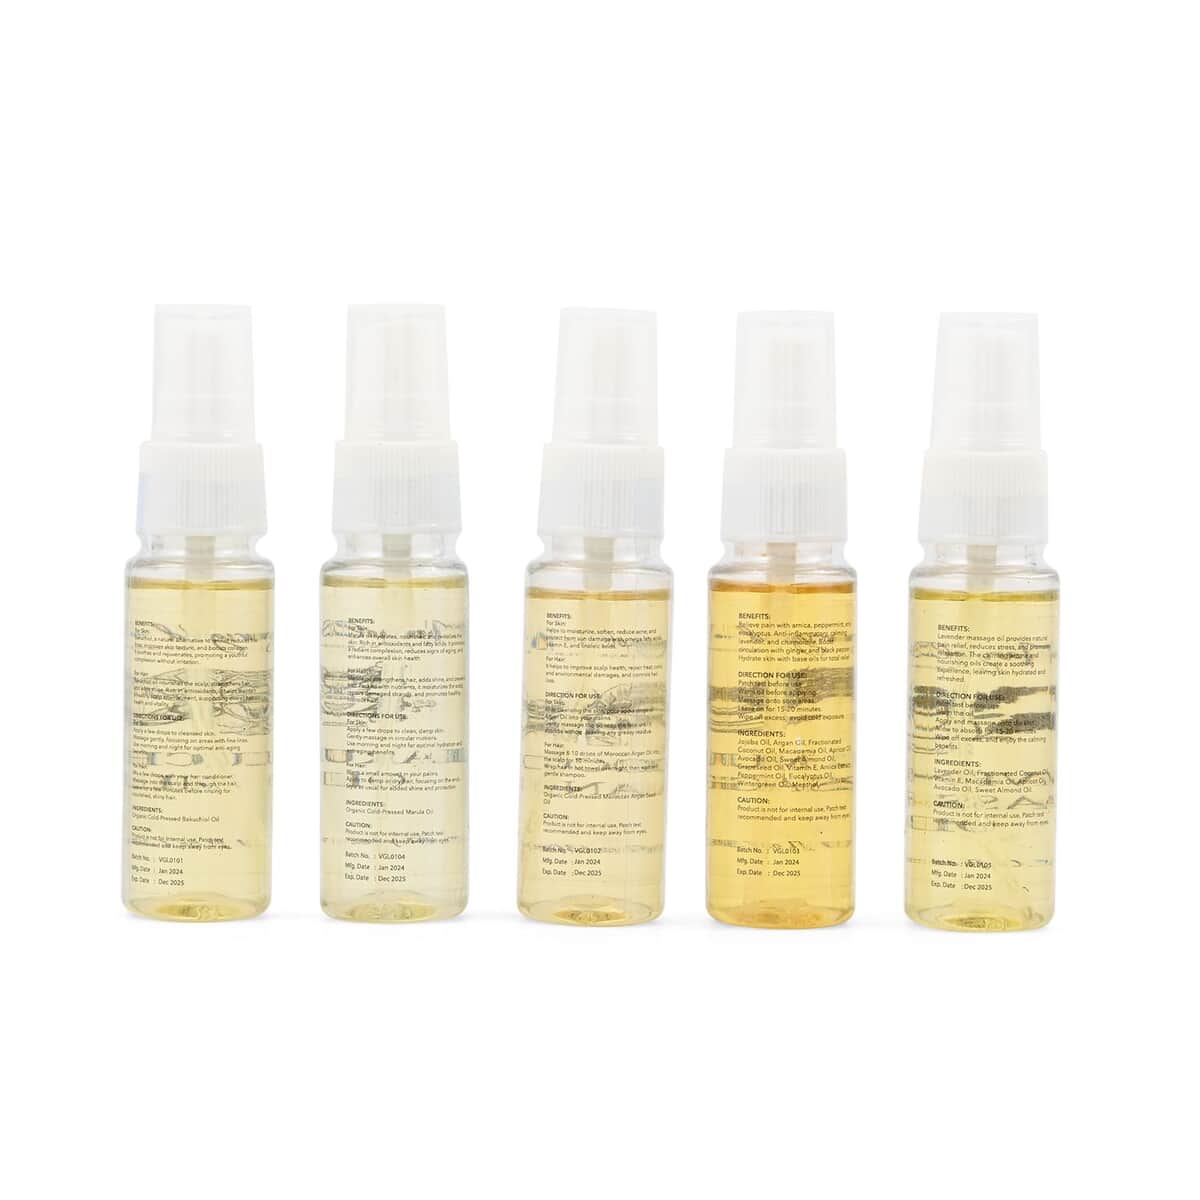 4th July Preview Deals Set of 5 Oils- Travel Edition, 2 of The Muscle Pain Relief Oils, 1 Marula, 1 Argan and 1 Bakuchi Oil (30 ml Each) Spray Bottles image number 1